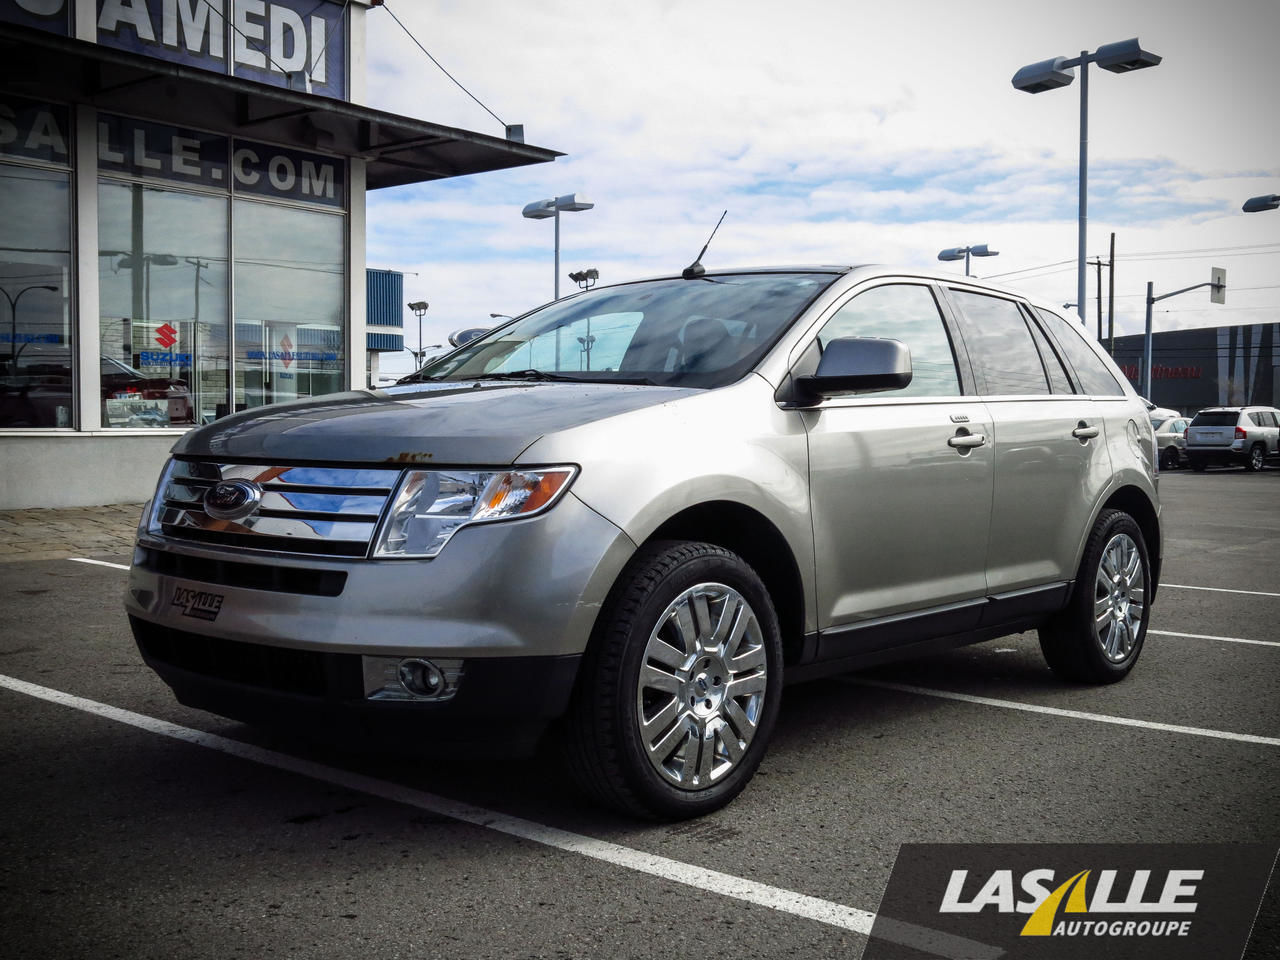 2008 Ford edge limited gas mileage #7